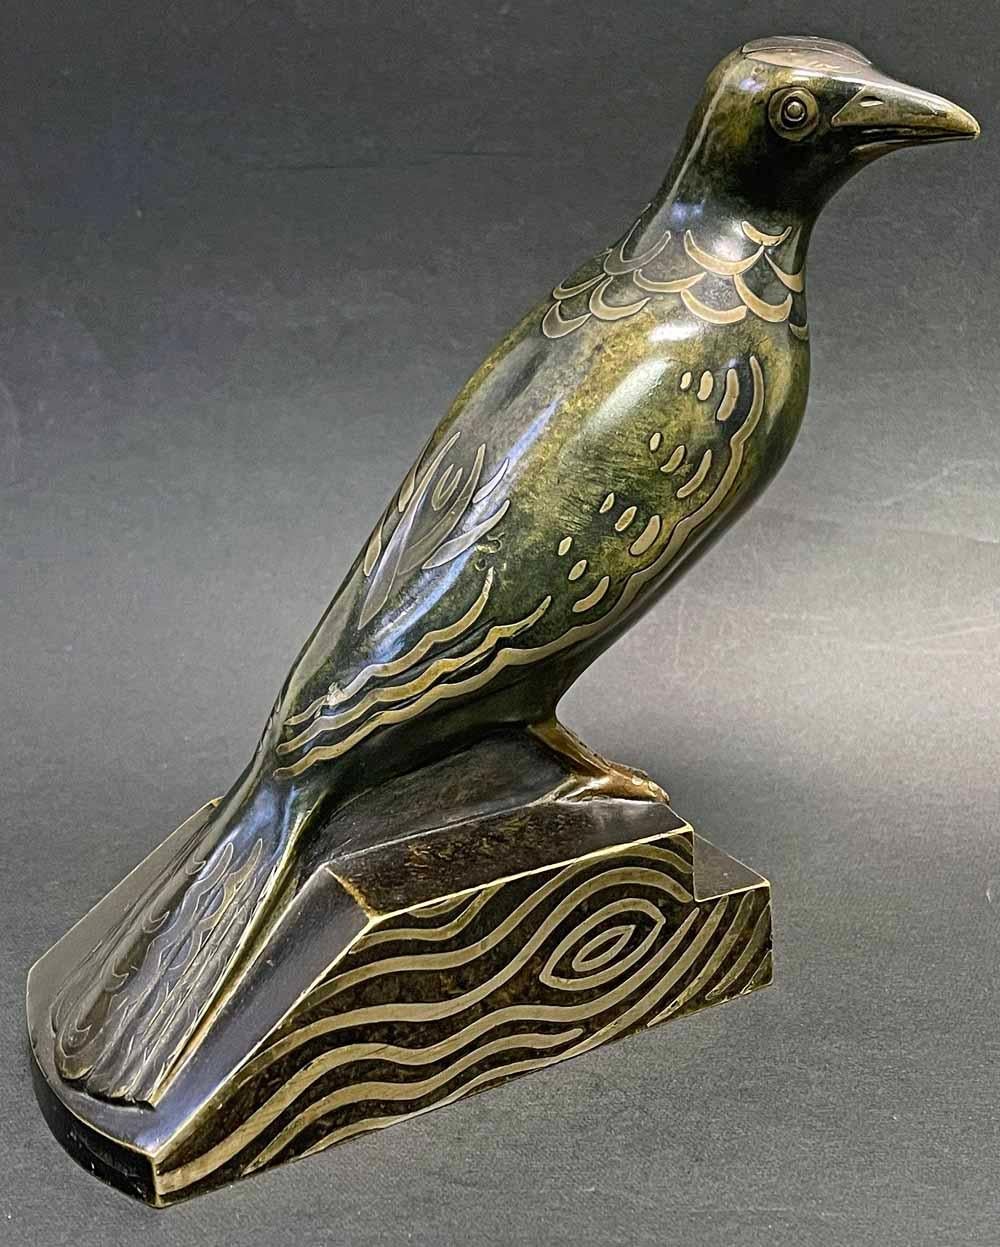 Elegant and sophisticated, this bronze blackbird -- inset with a second metal, probably silver -- was designed by Jean Luce, one of France's master designers in the Art Deco period.  Mixed metal (or dinanderie) artisanry was revived by a number of